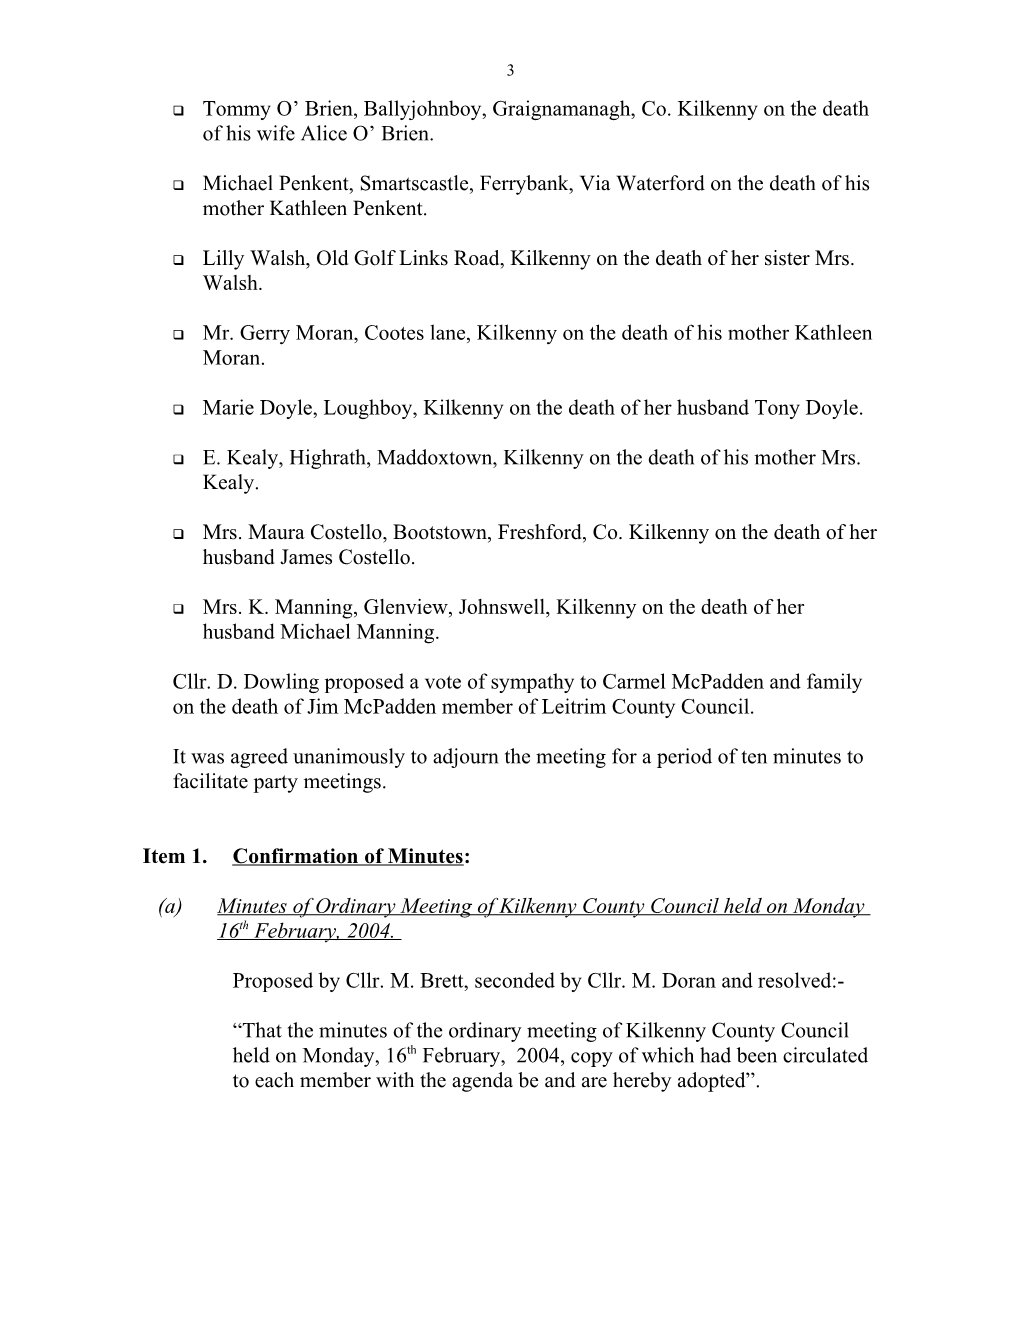 Minutes of the Ordinary Meeting of Kilkenny County Council Held on Monday, 22Nd March, 2004 at 3